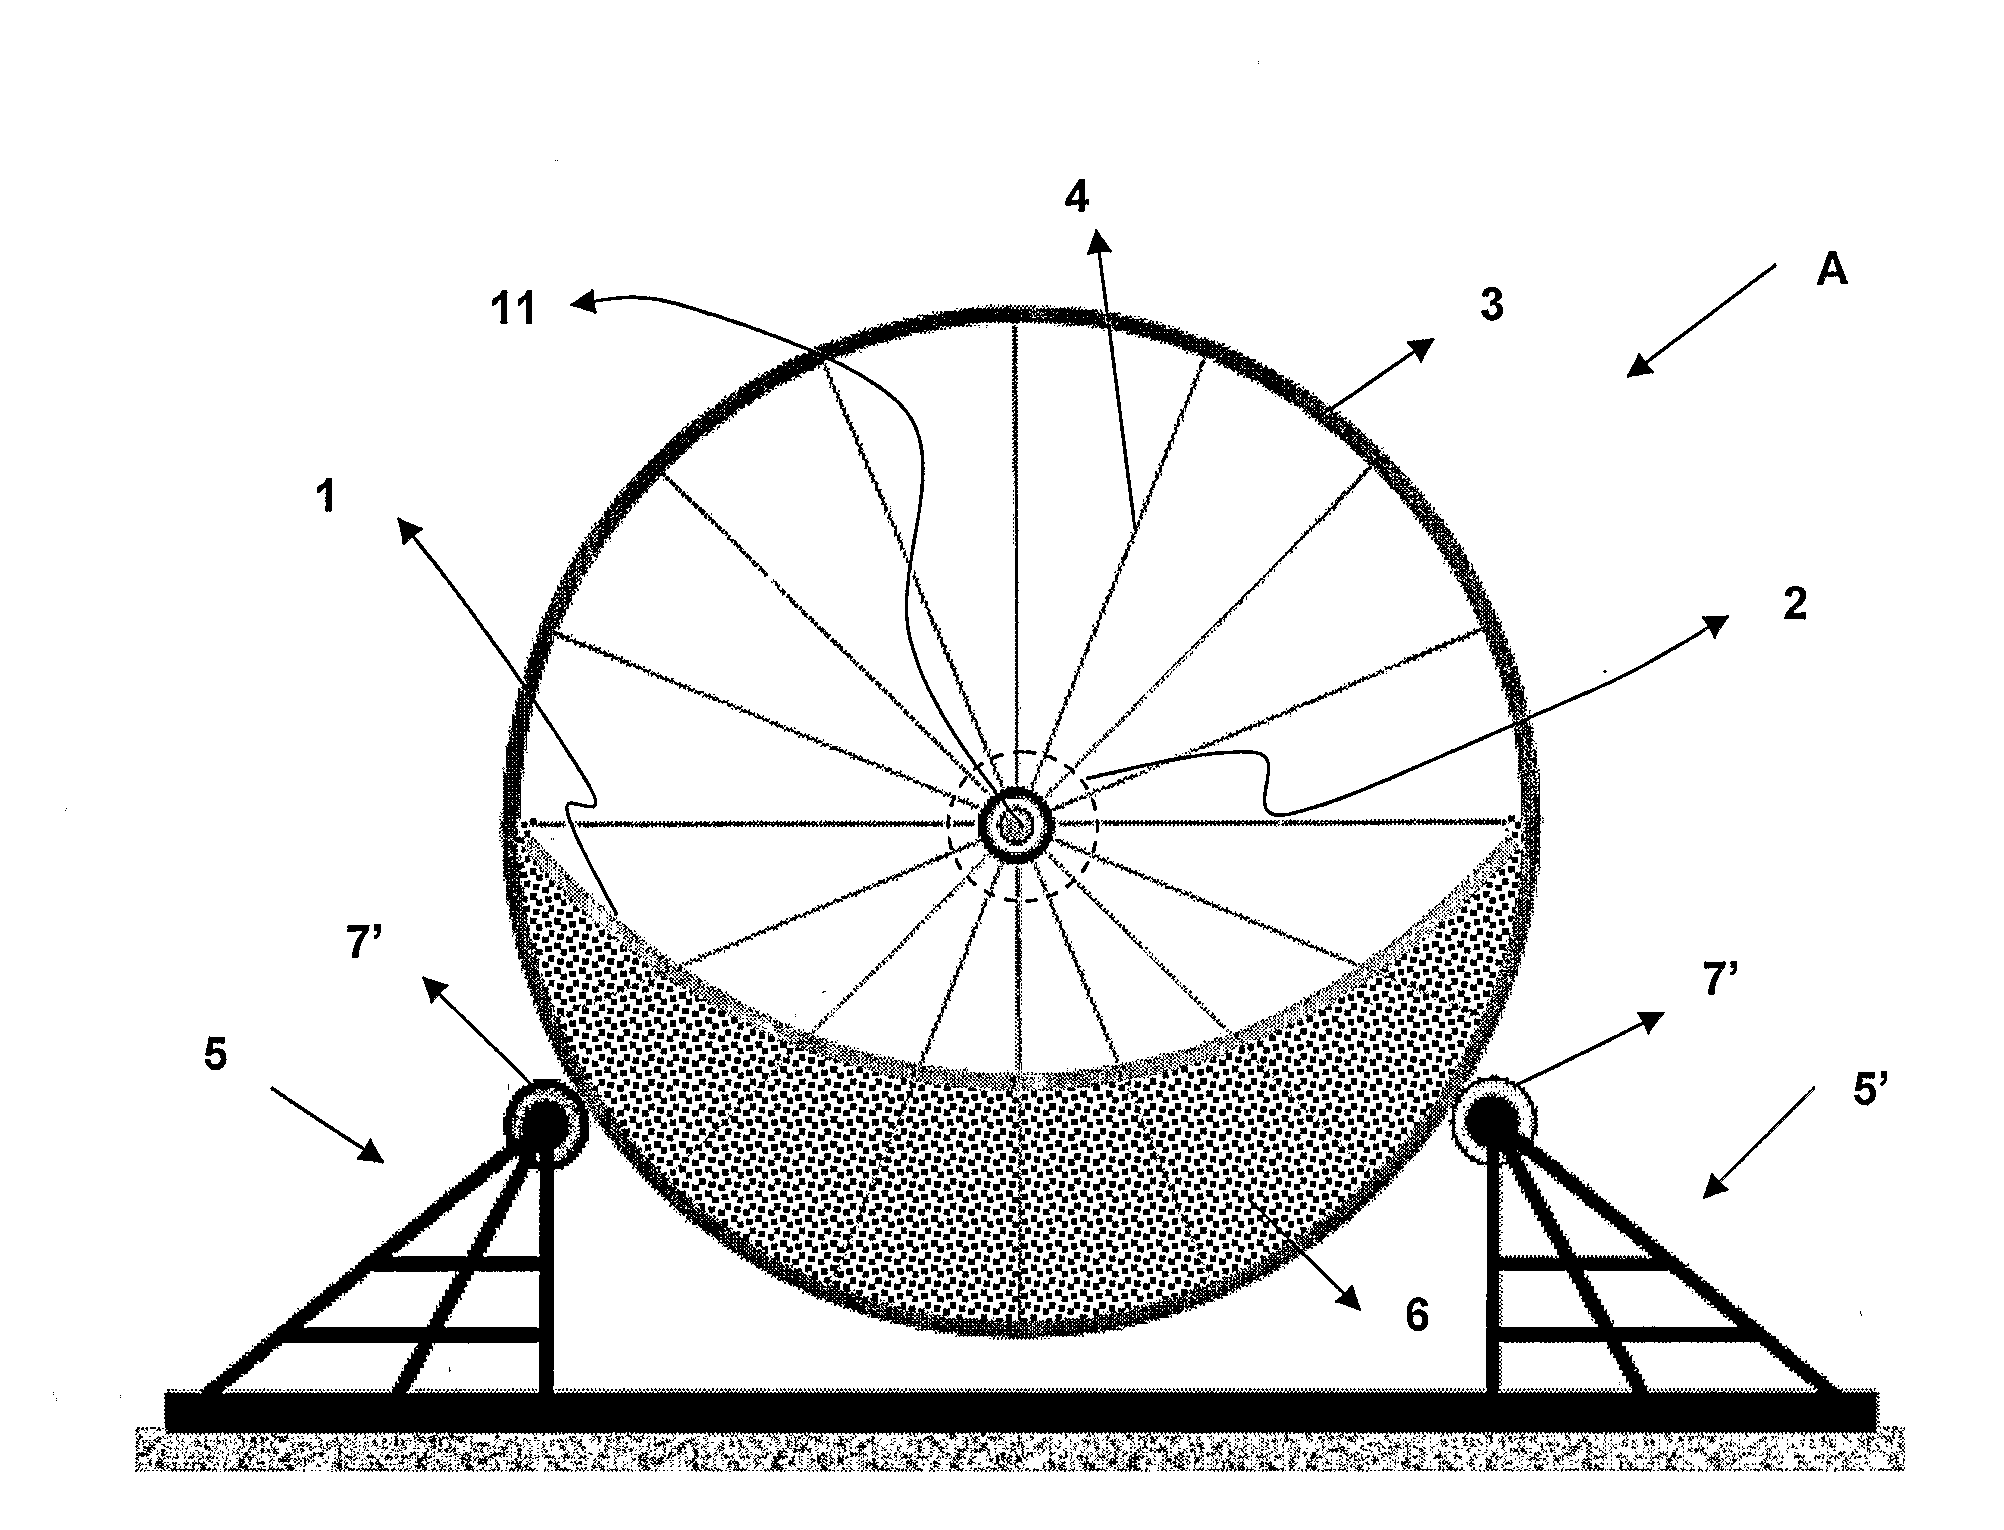 Parabolic solar trough systems with rotary tracking means